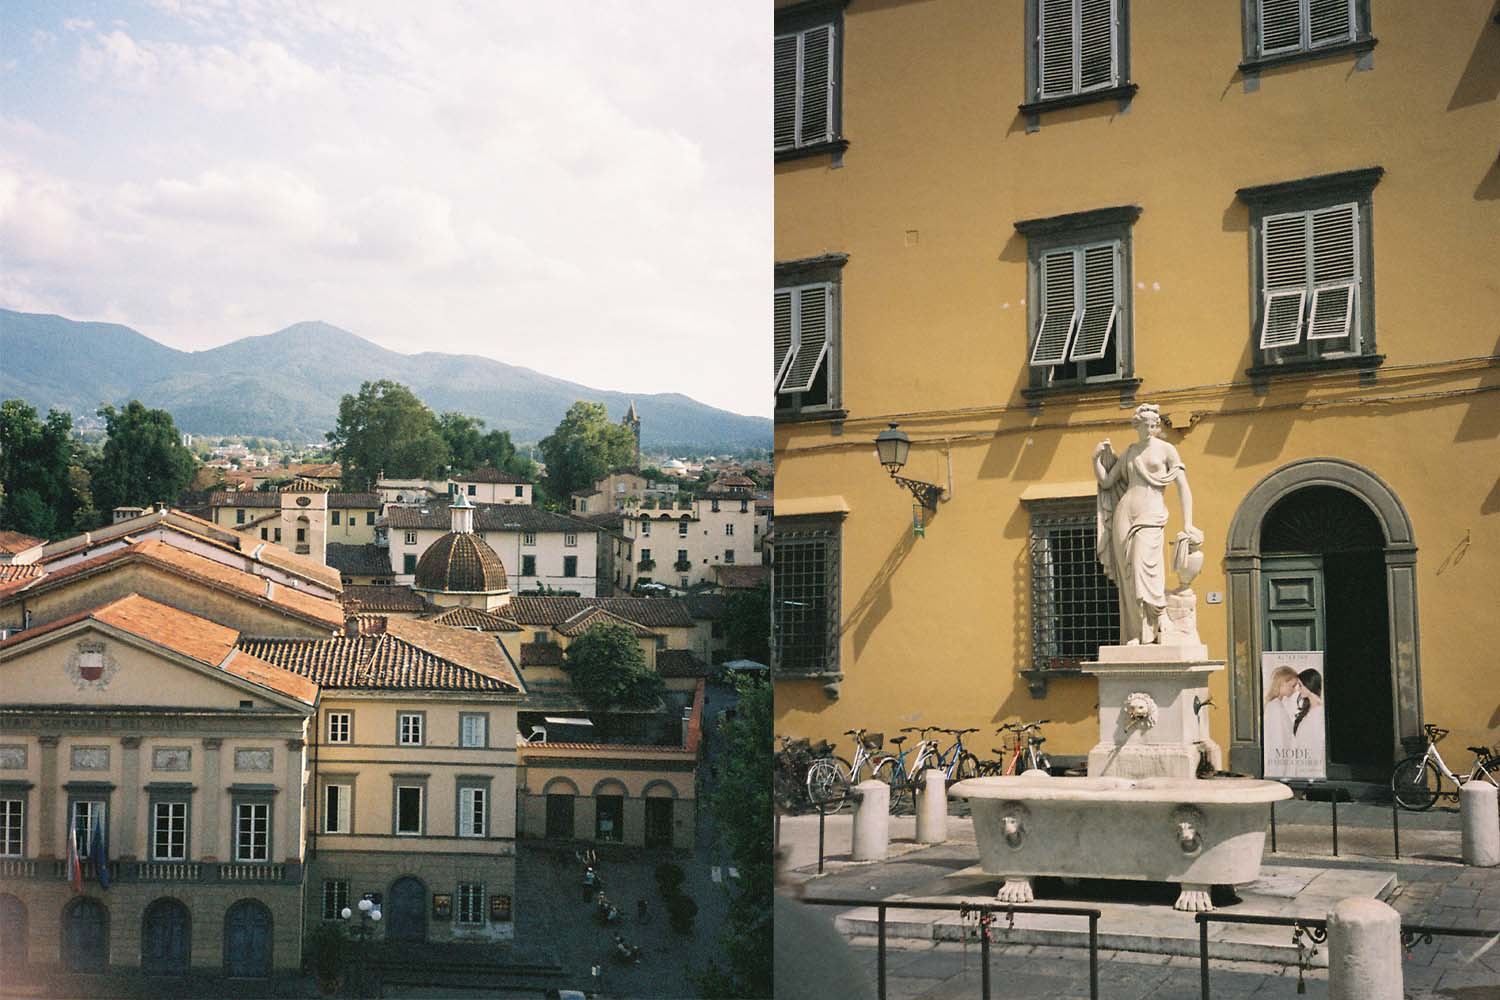 Scenes from around Lucca